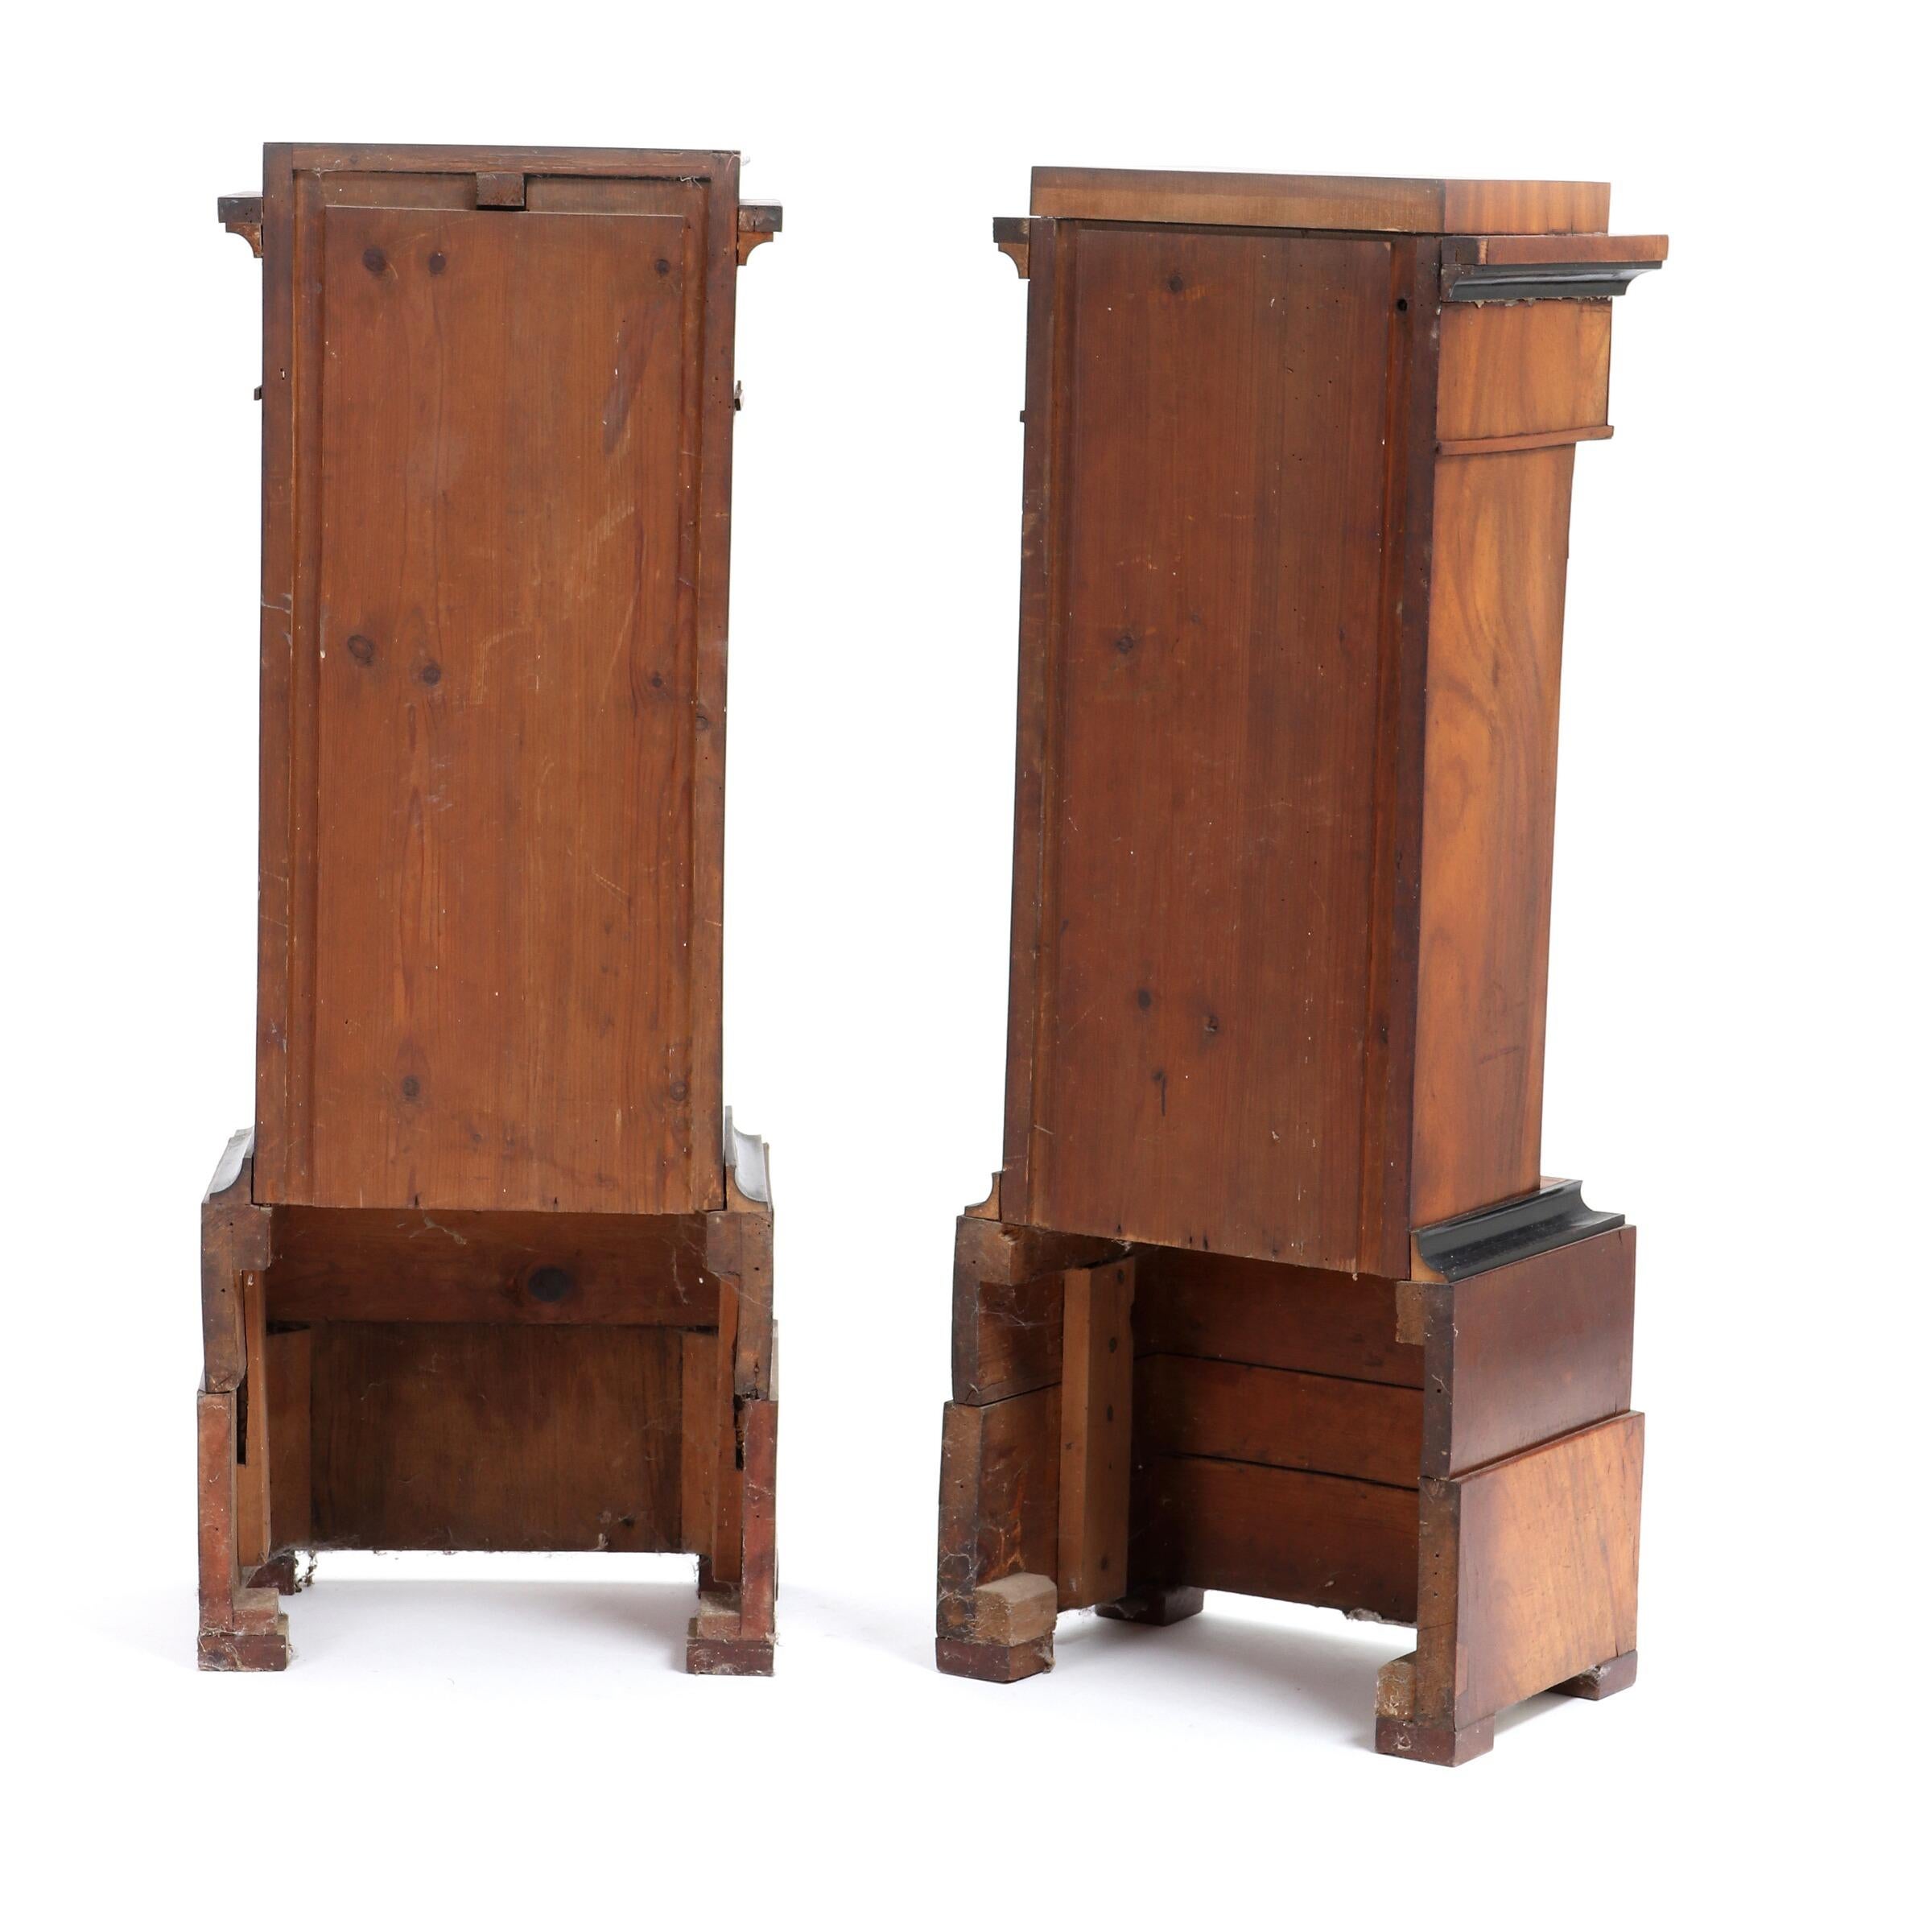 A pair of 19th century Empire style mahogany pedestals with gilt bronze mountings. Measures: H. 47, W. 18, D. 12.5 in.